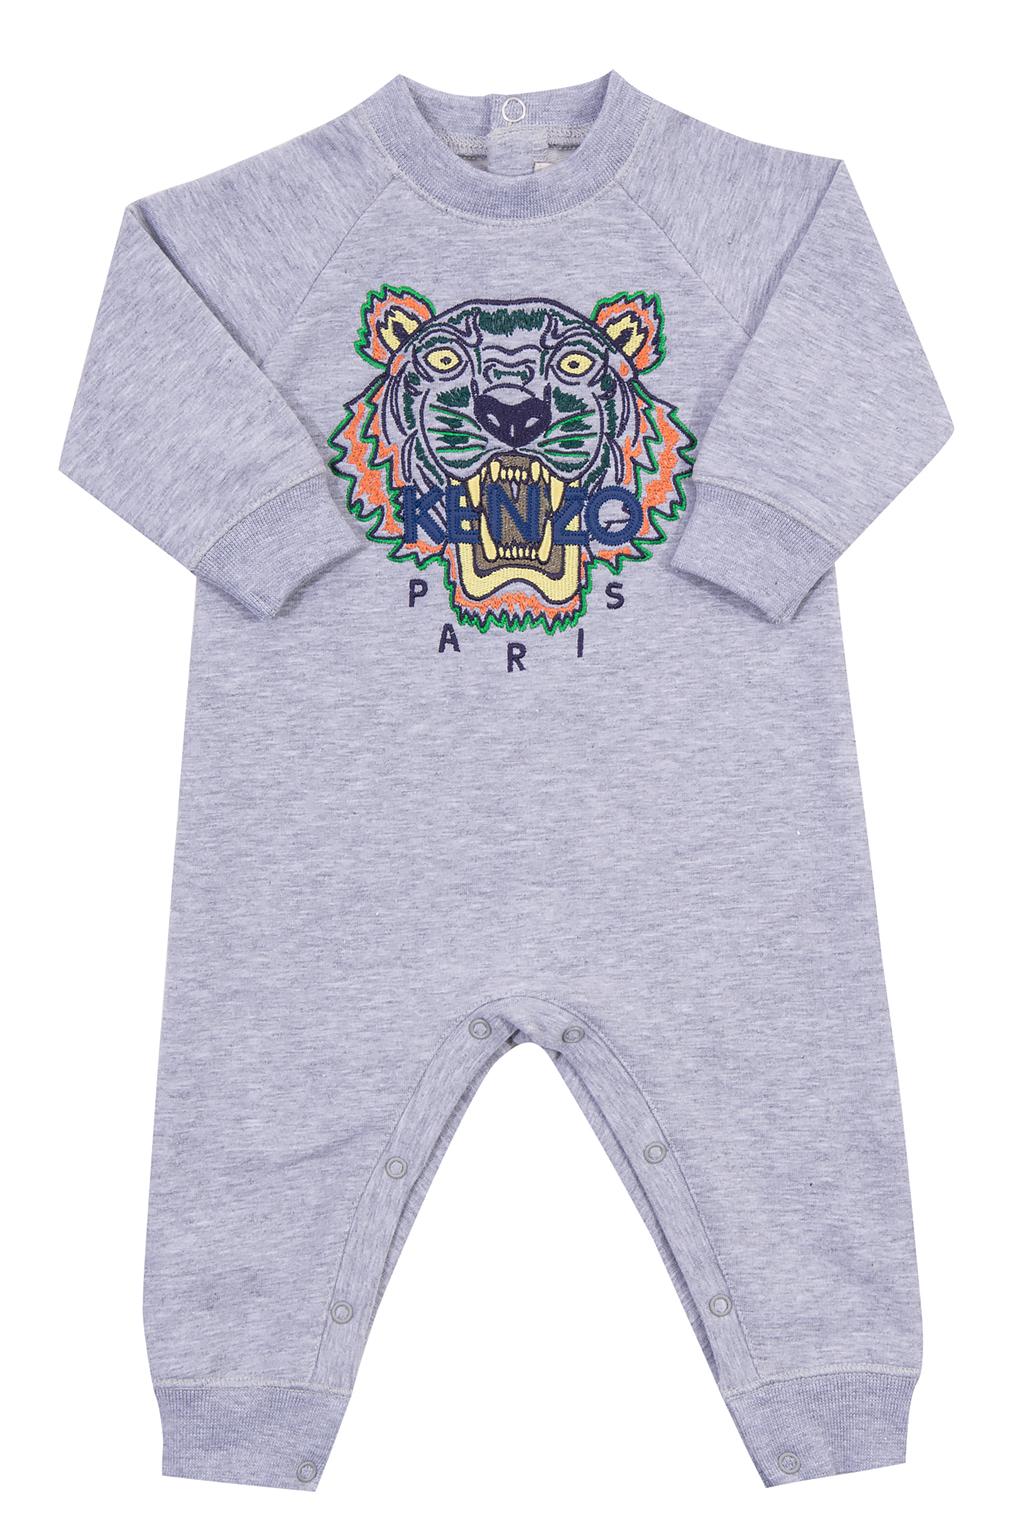 embroidered tiger head Kenzo Kids 